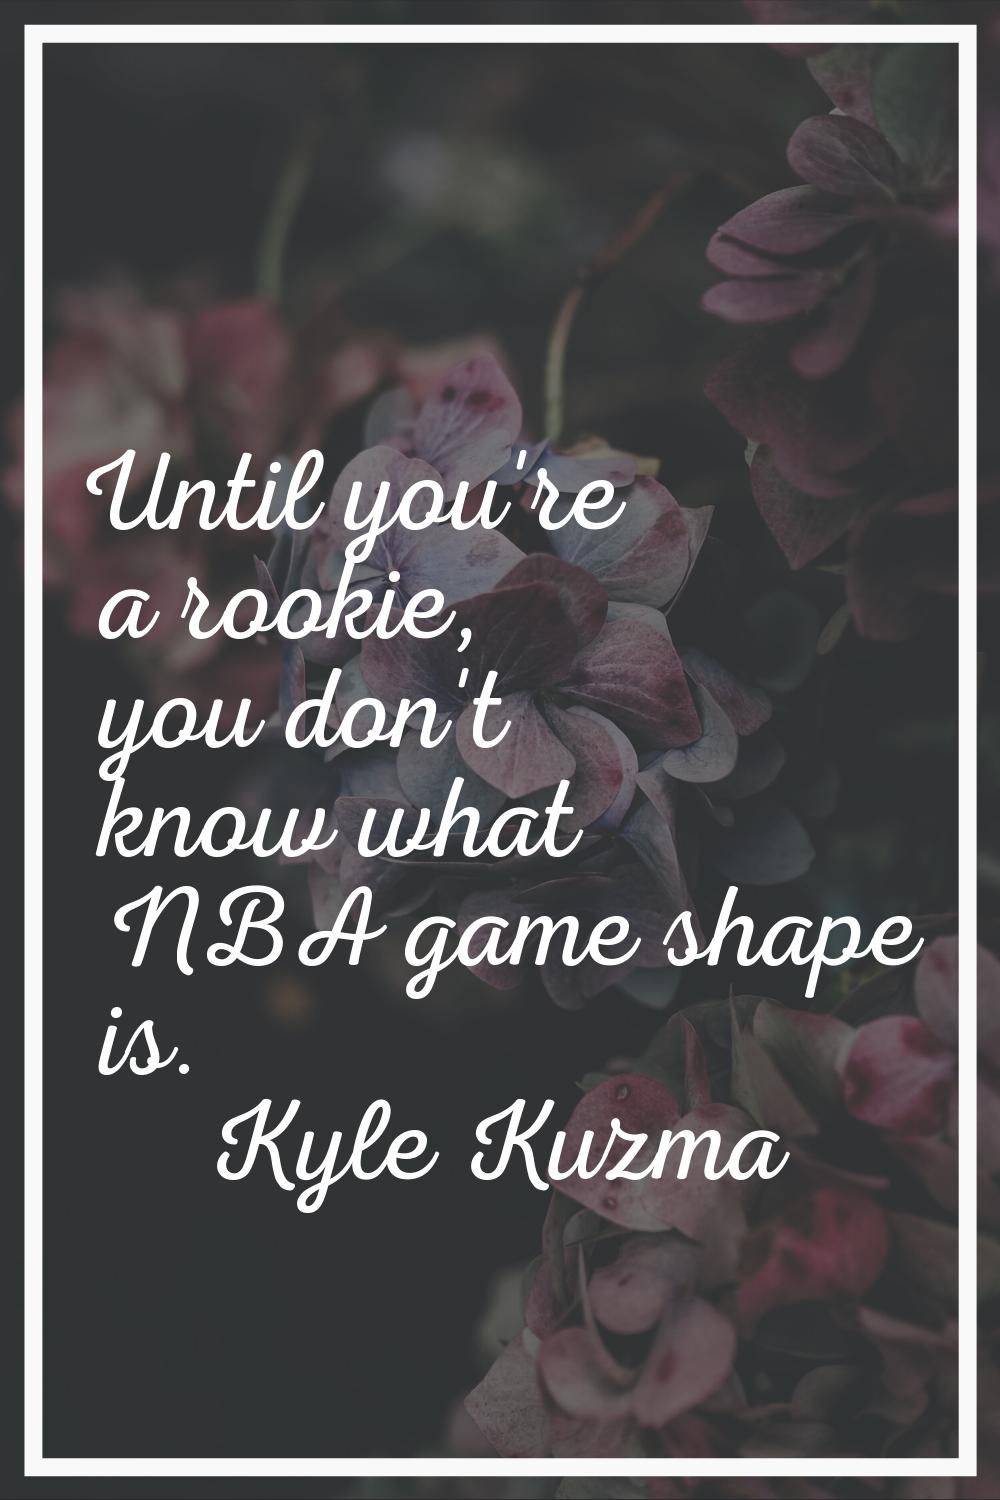 Until you're a rookie, you don't know what NBA game shape is.